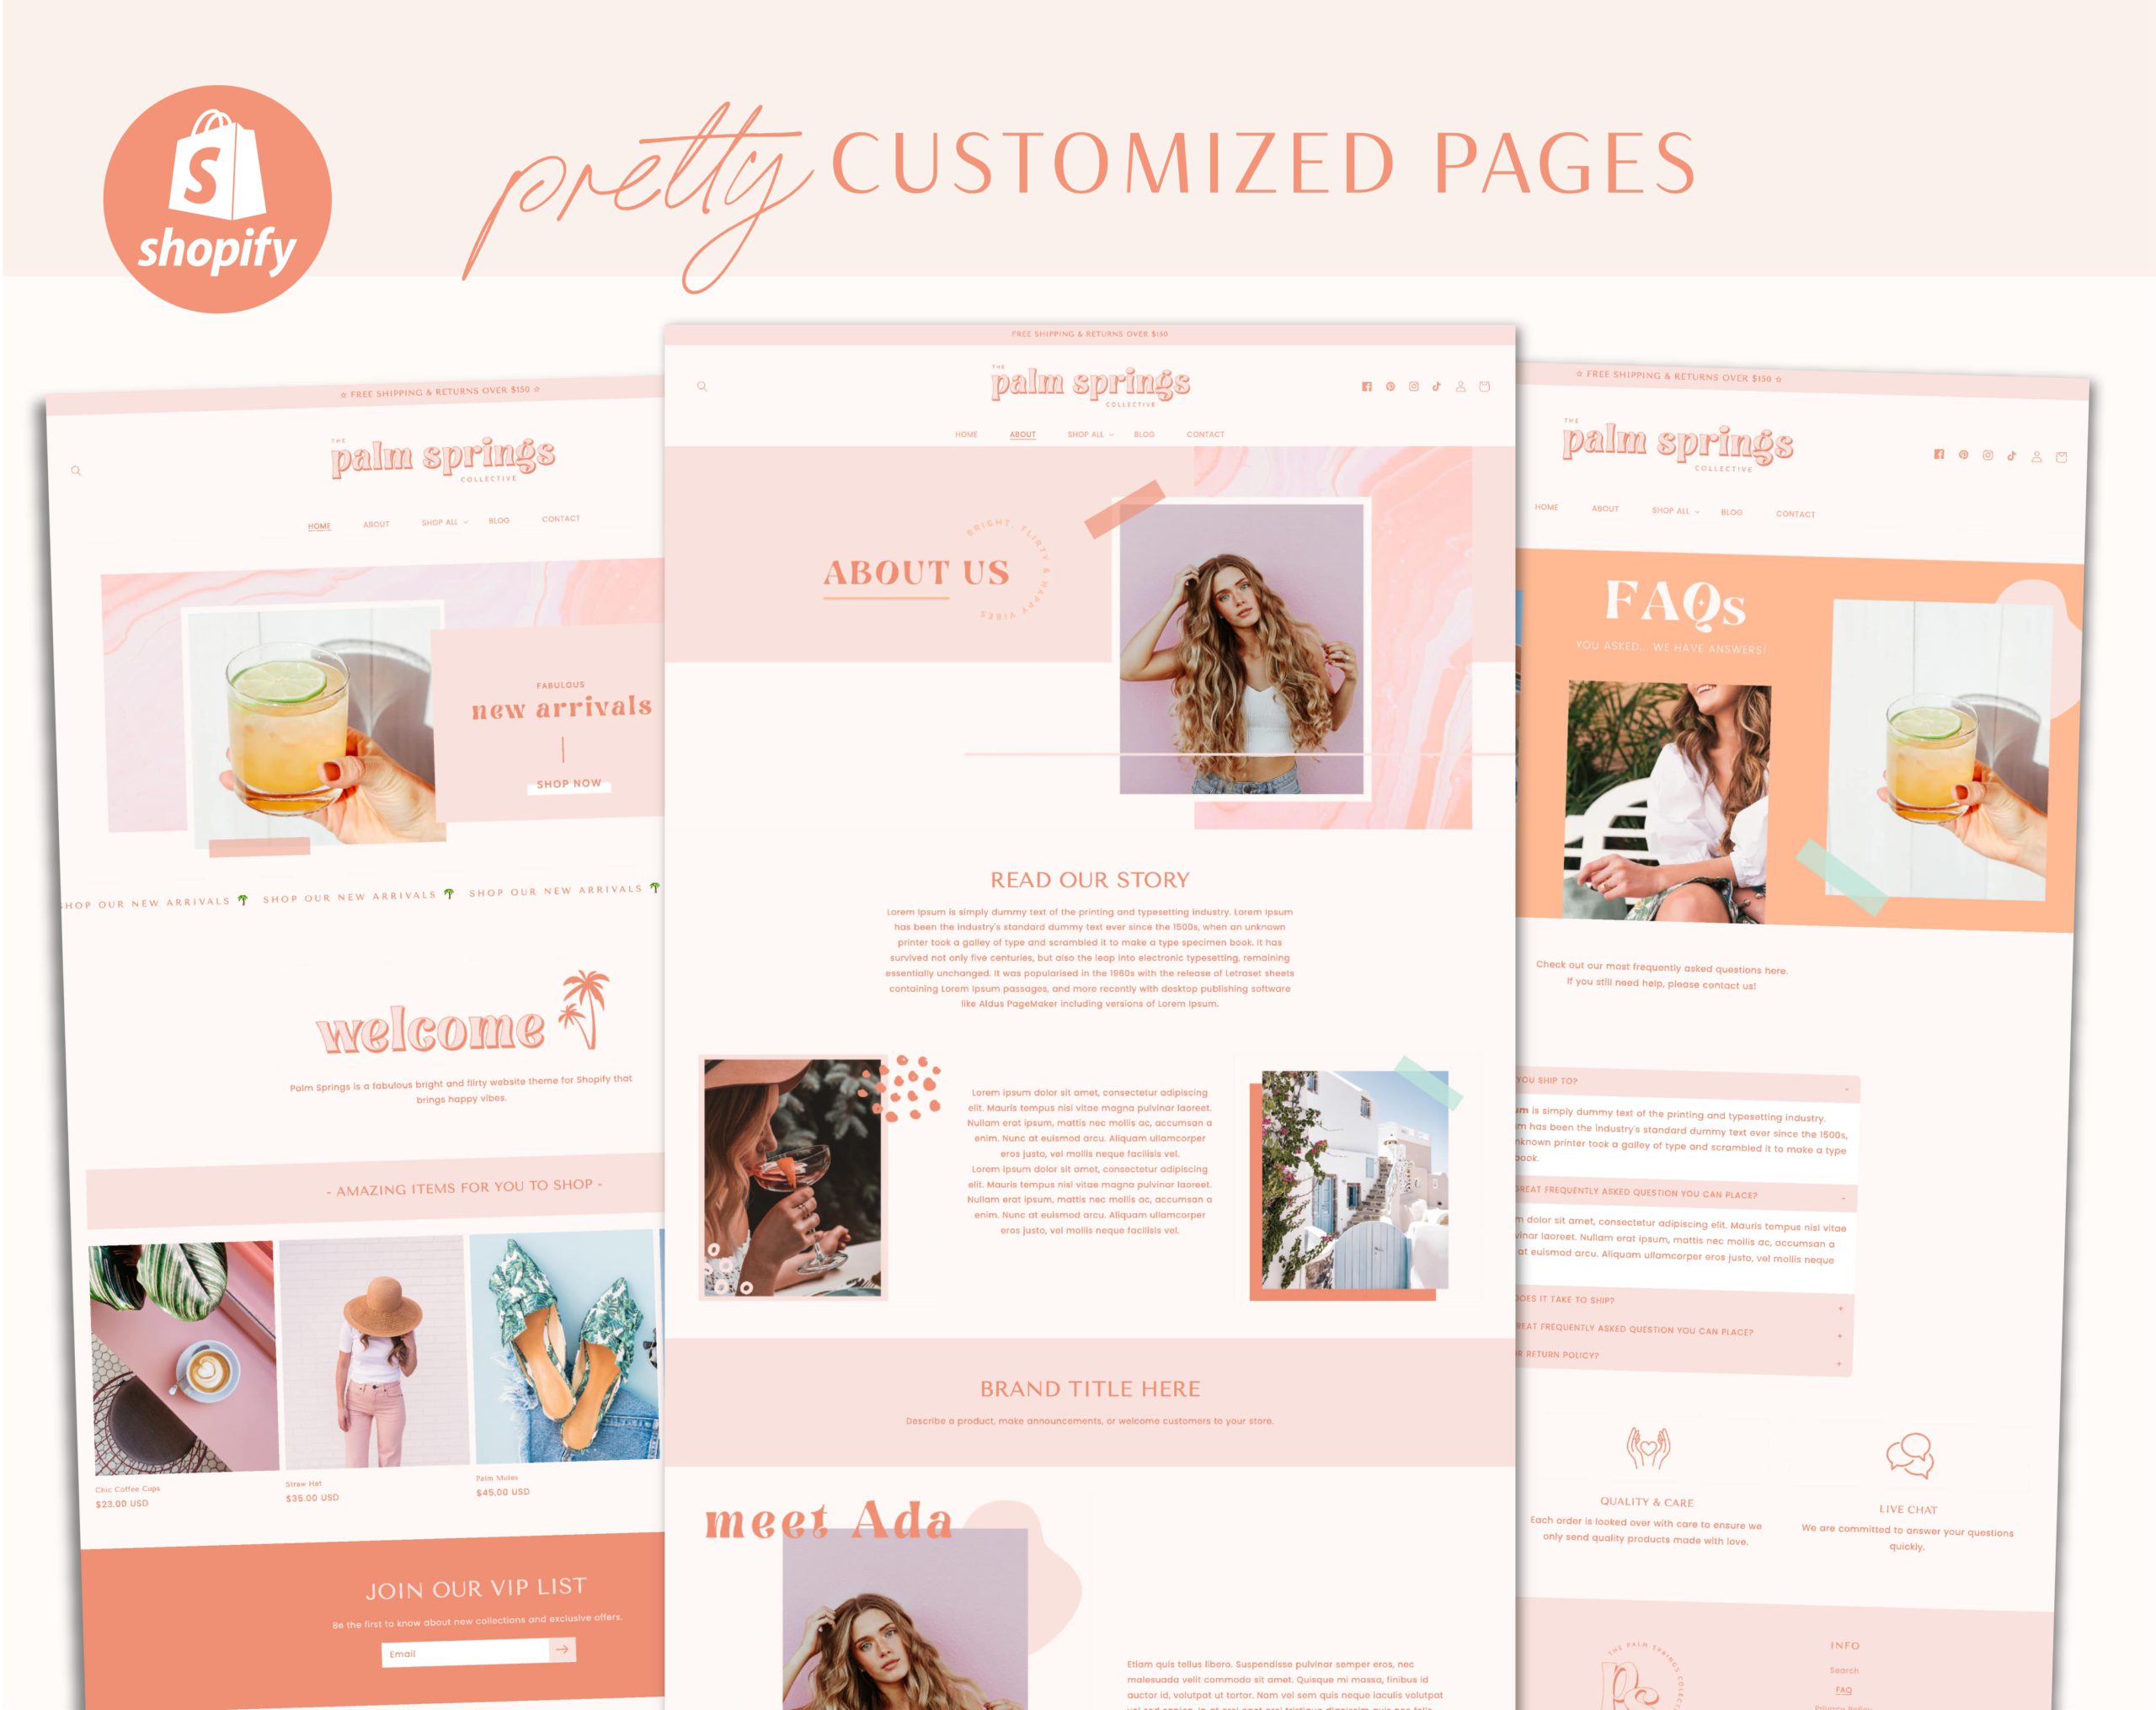 Bright Boho Shopify Theme Template, Pink Shopify Theme, Palm Springs Website Design Shopify 0S 2.0 Drag and Drop with Canva Banners